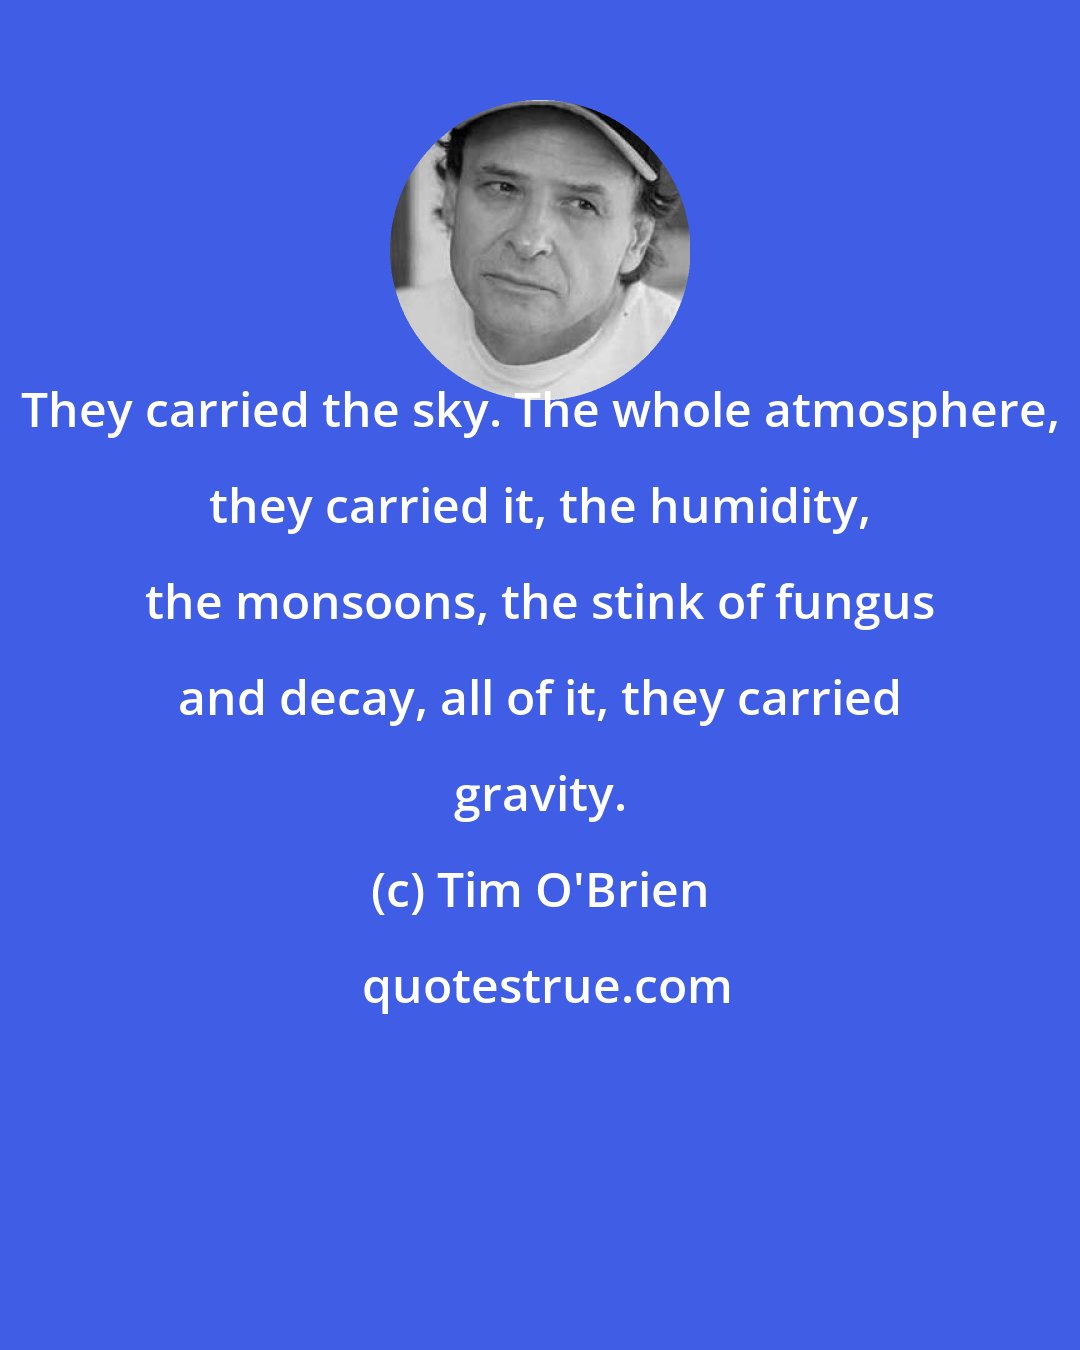 Tim O'Brien: They carried the sky. The whole atmosphere, they carried it, the humidity, the monsoons, the stink of fungus and decay, all of it, they carried gravity.